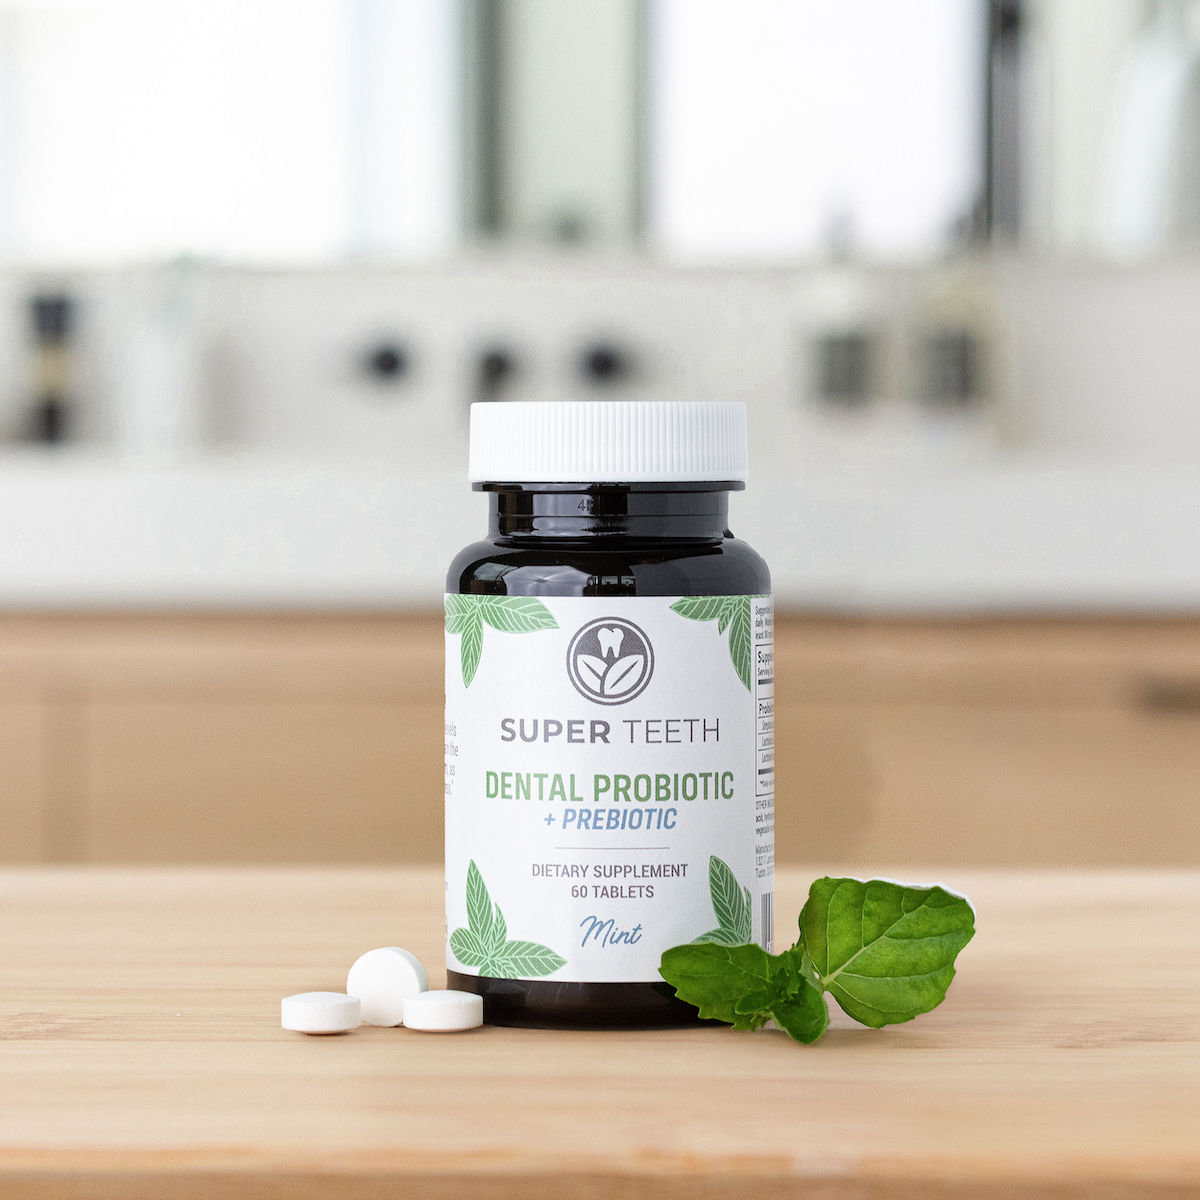 Super Teeth: The Amazing Benefits Of Probiotics For Your Mouth